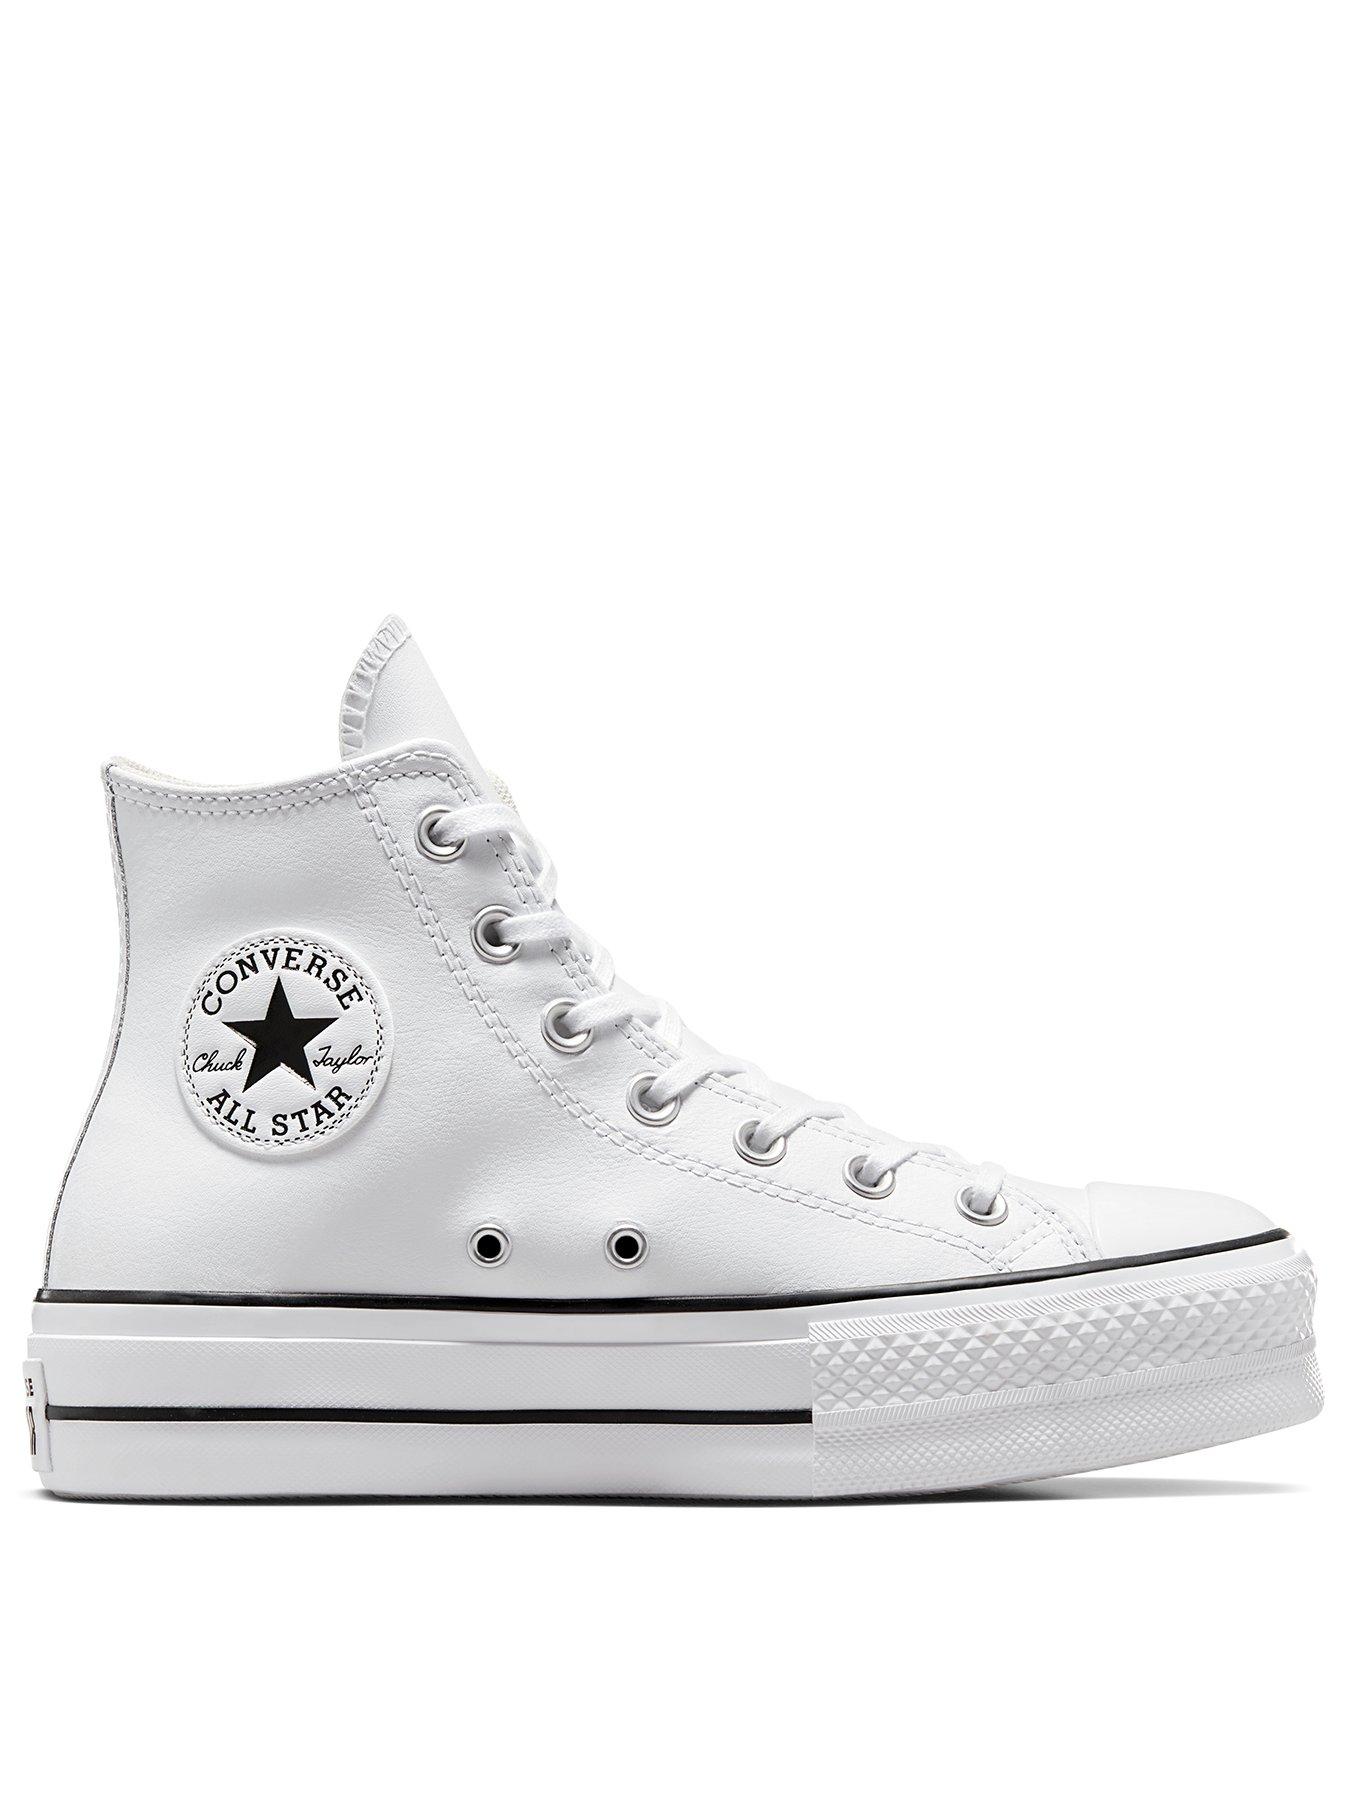 Converse Shoes, Trainers \u0026 Clothing 